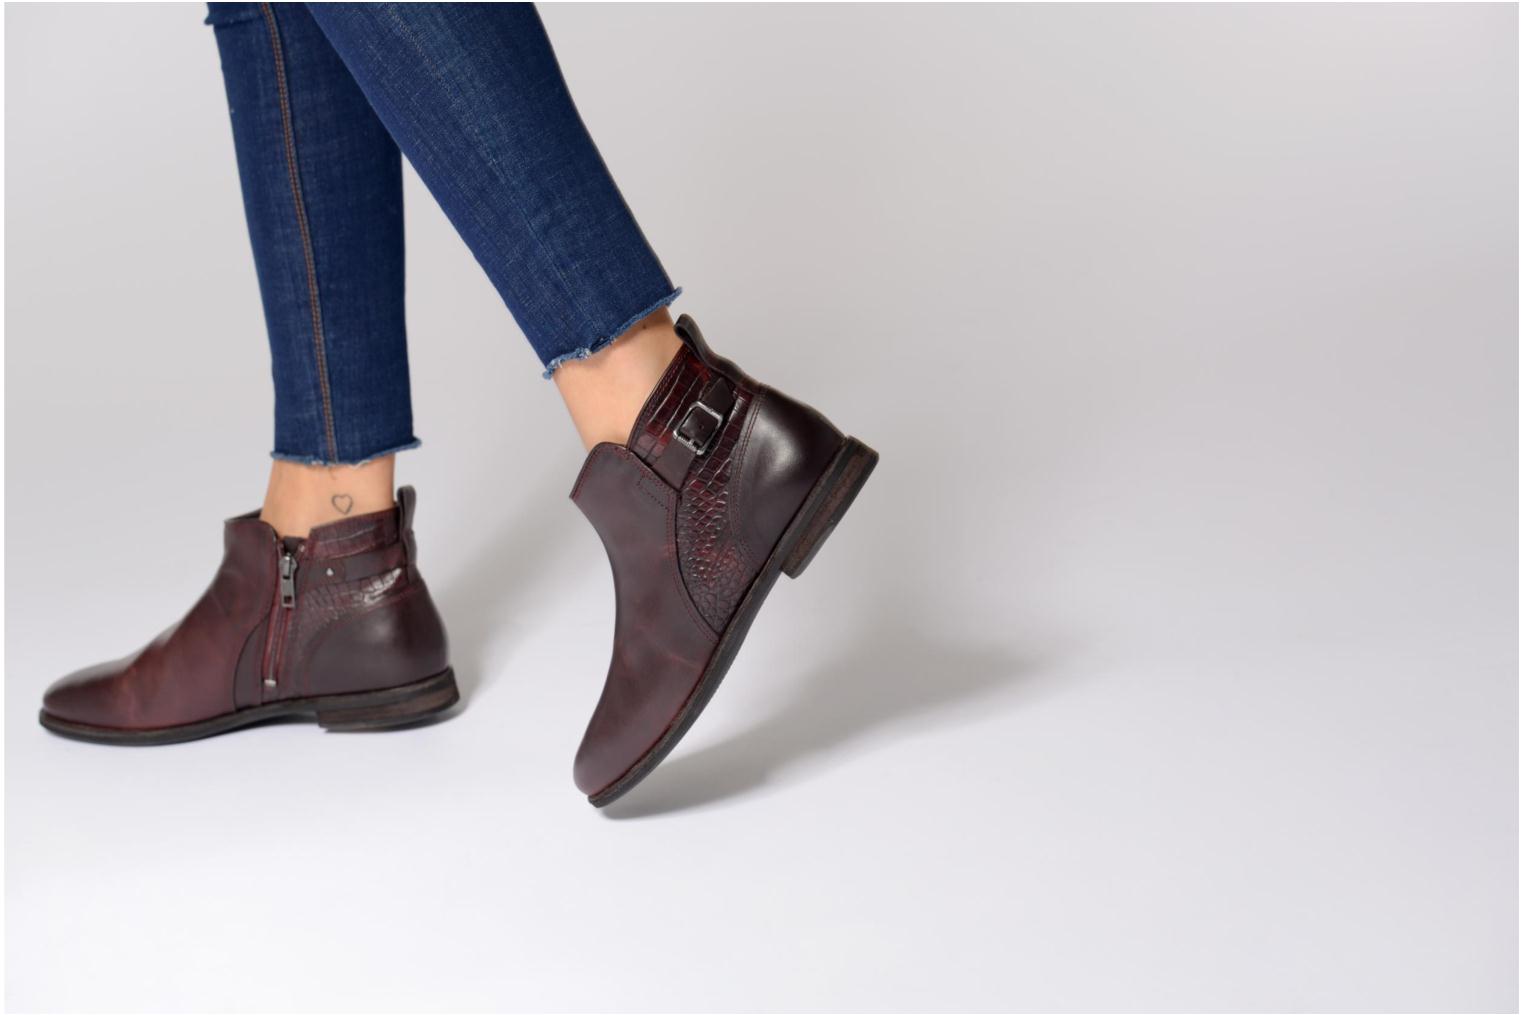 ugg demi croc ankle boots